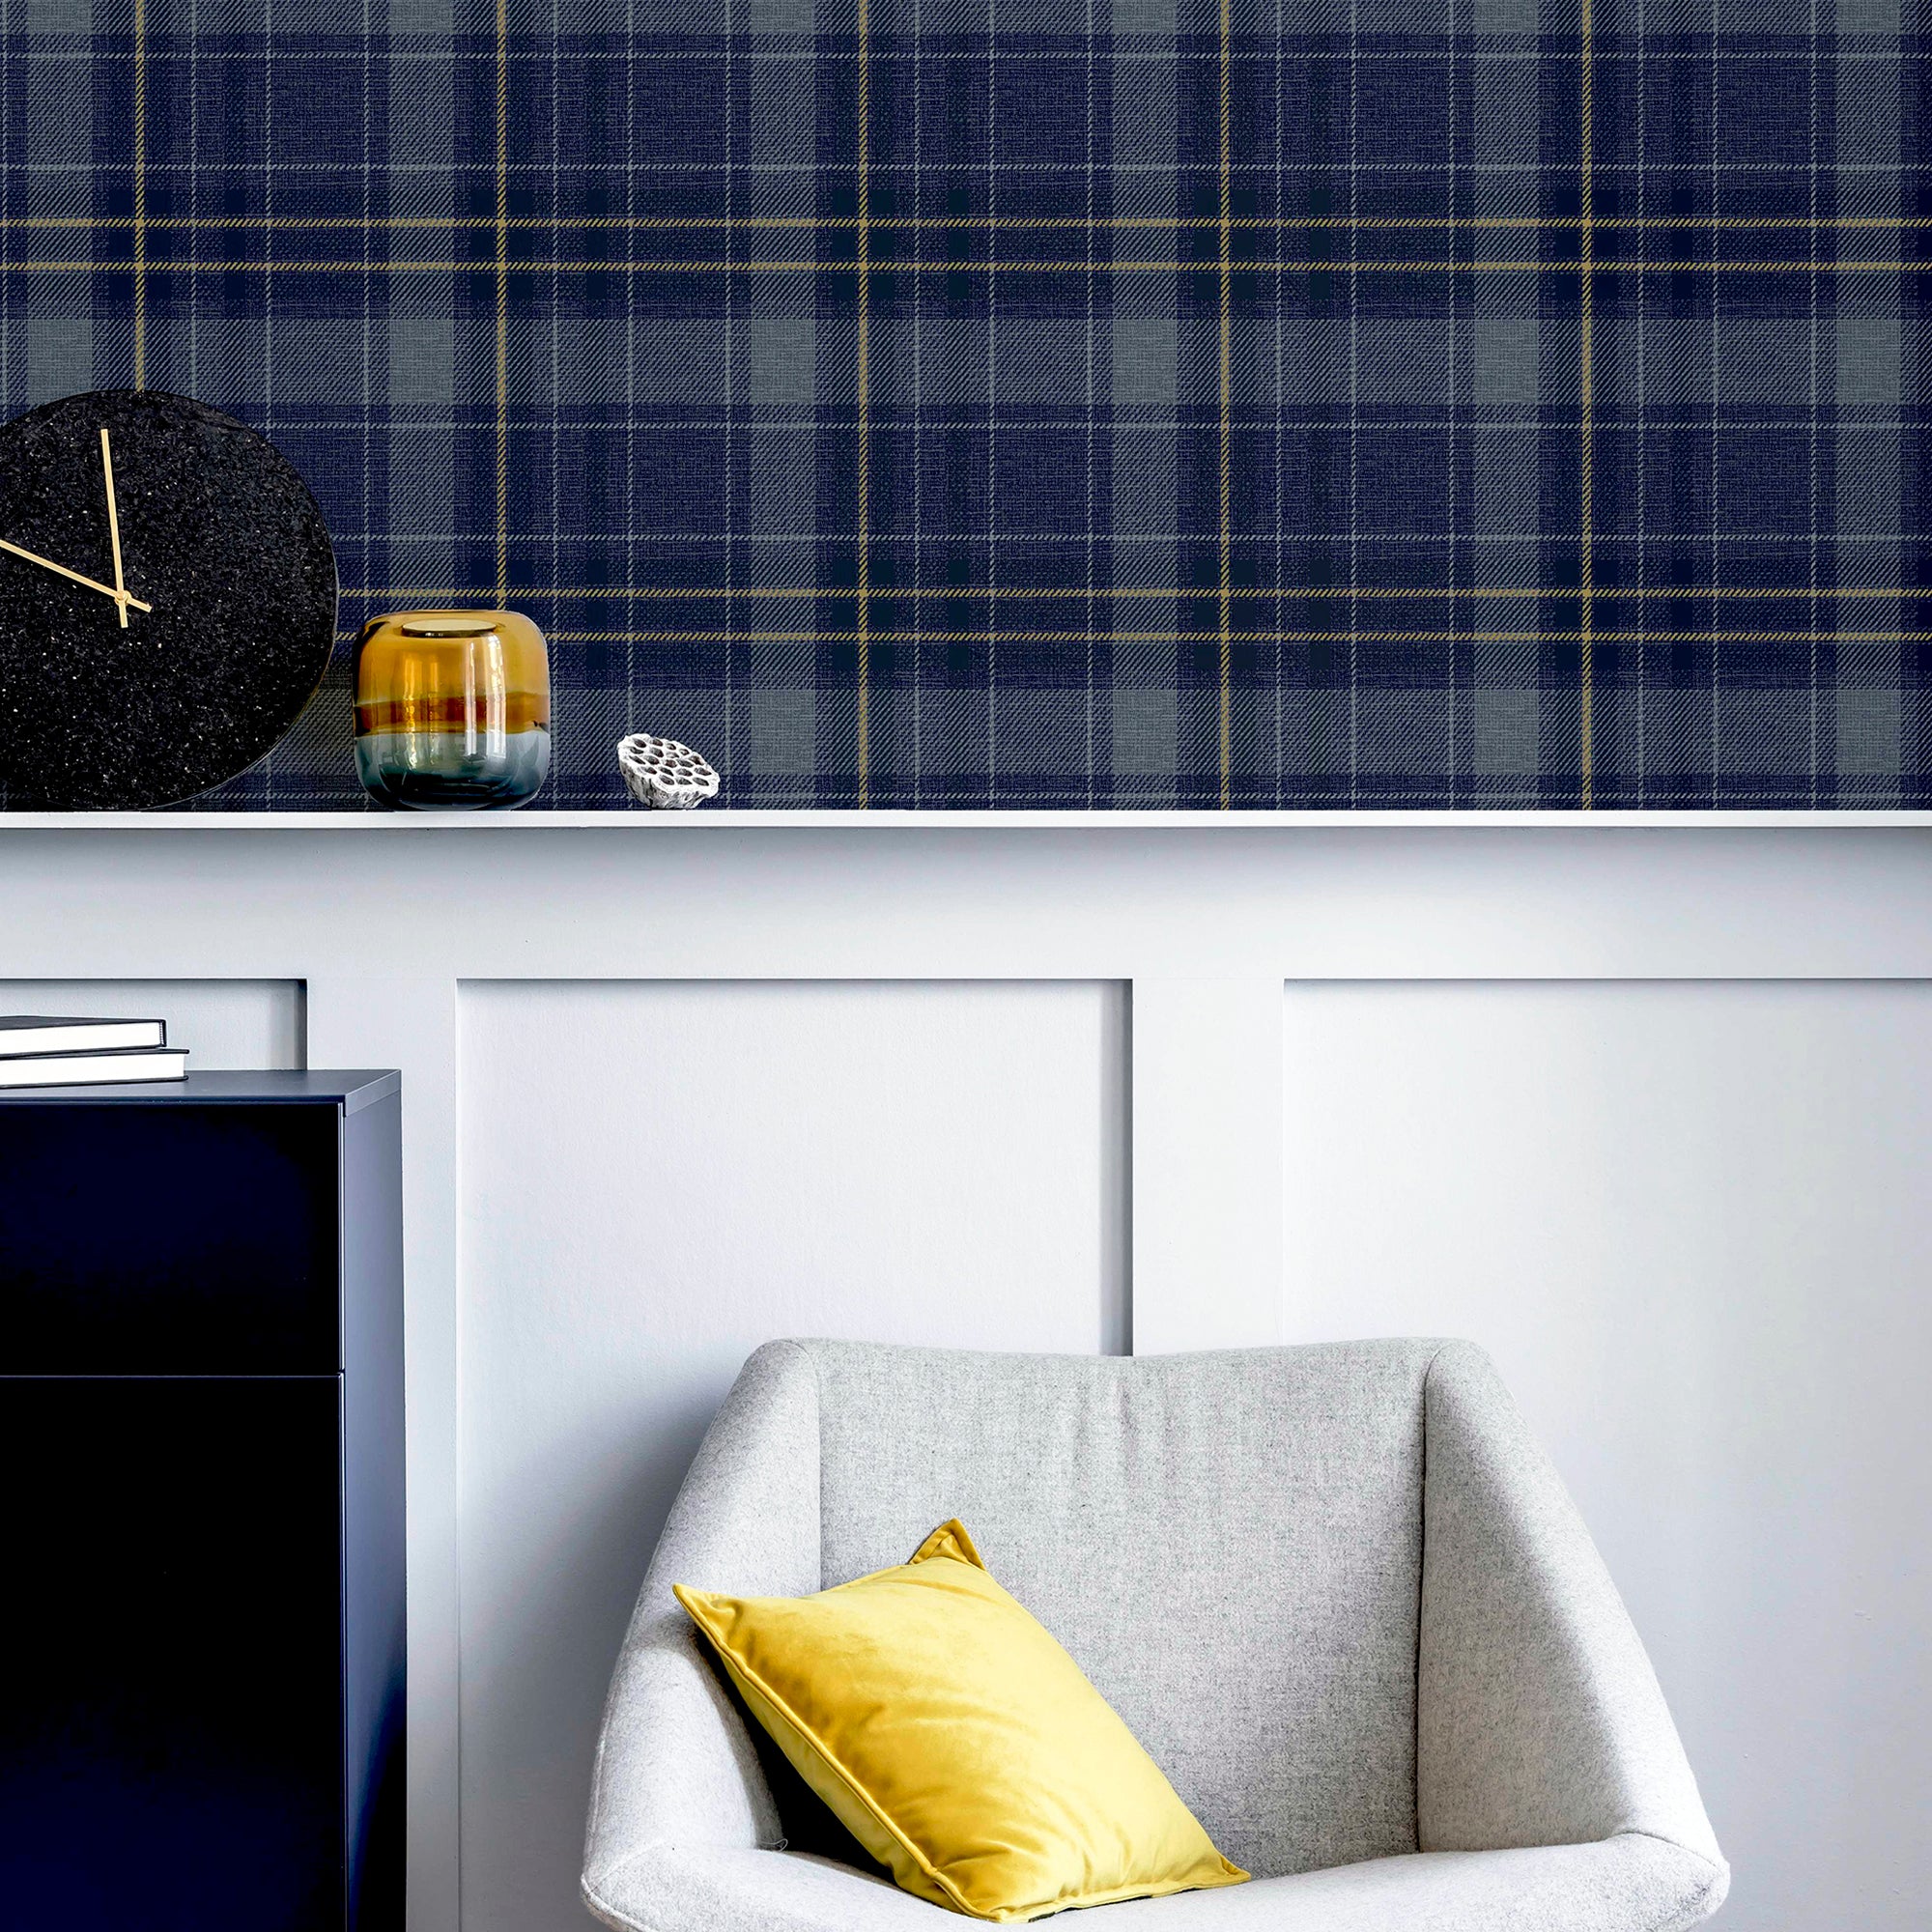 Twilled Plaid Navy & Gold Wallpaper